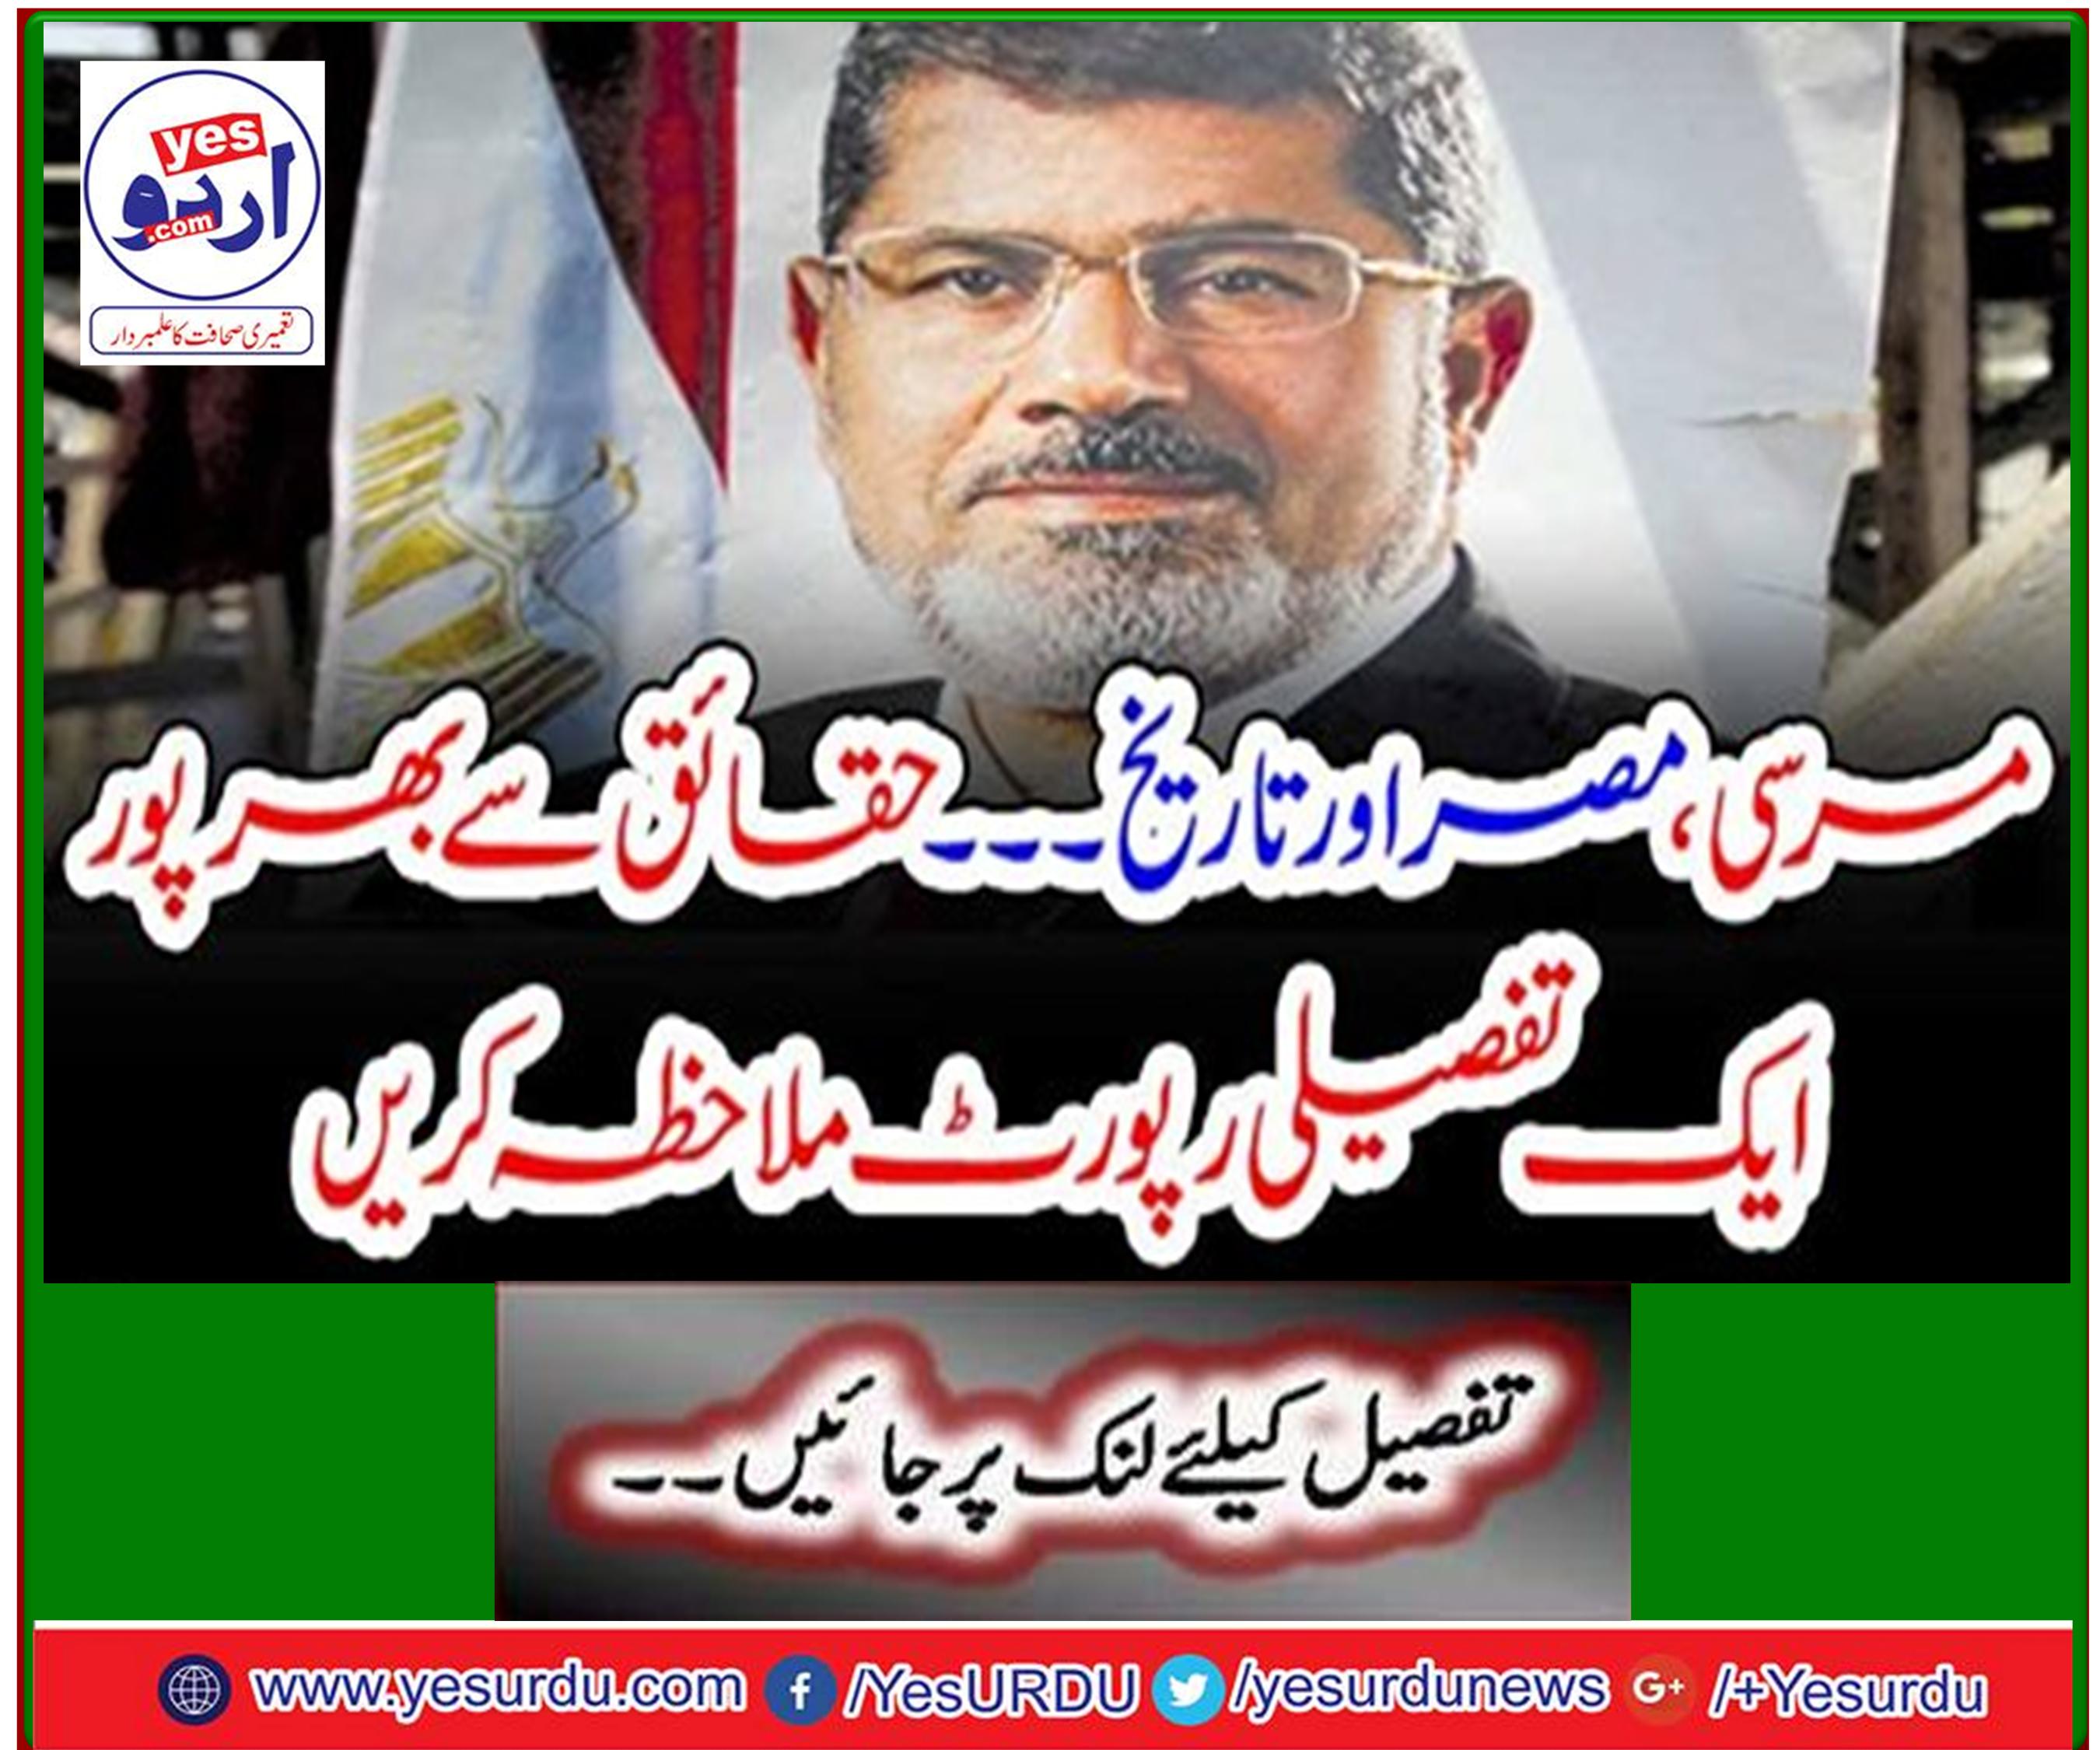 Morsi, Egypt and History - See a detailed report full of facts